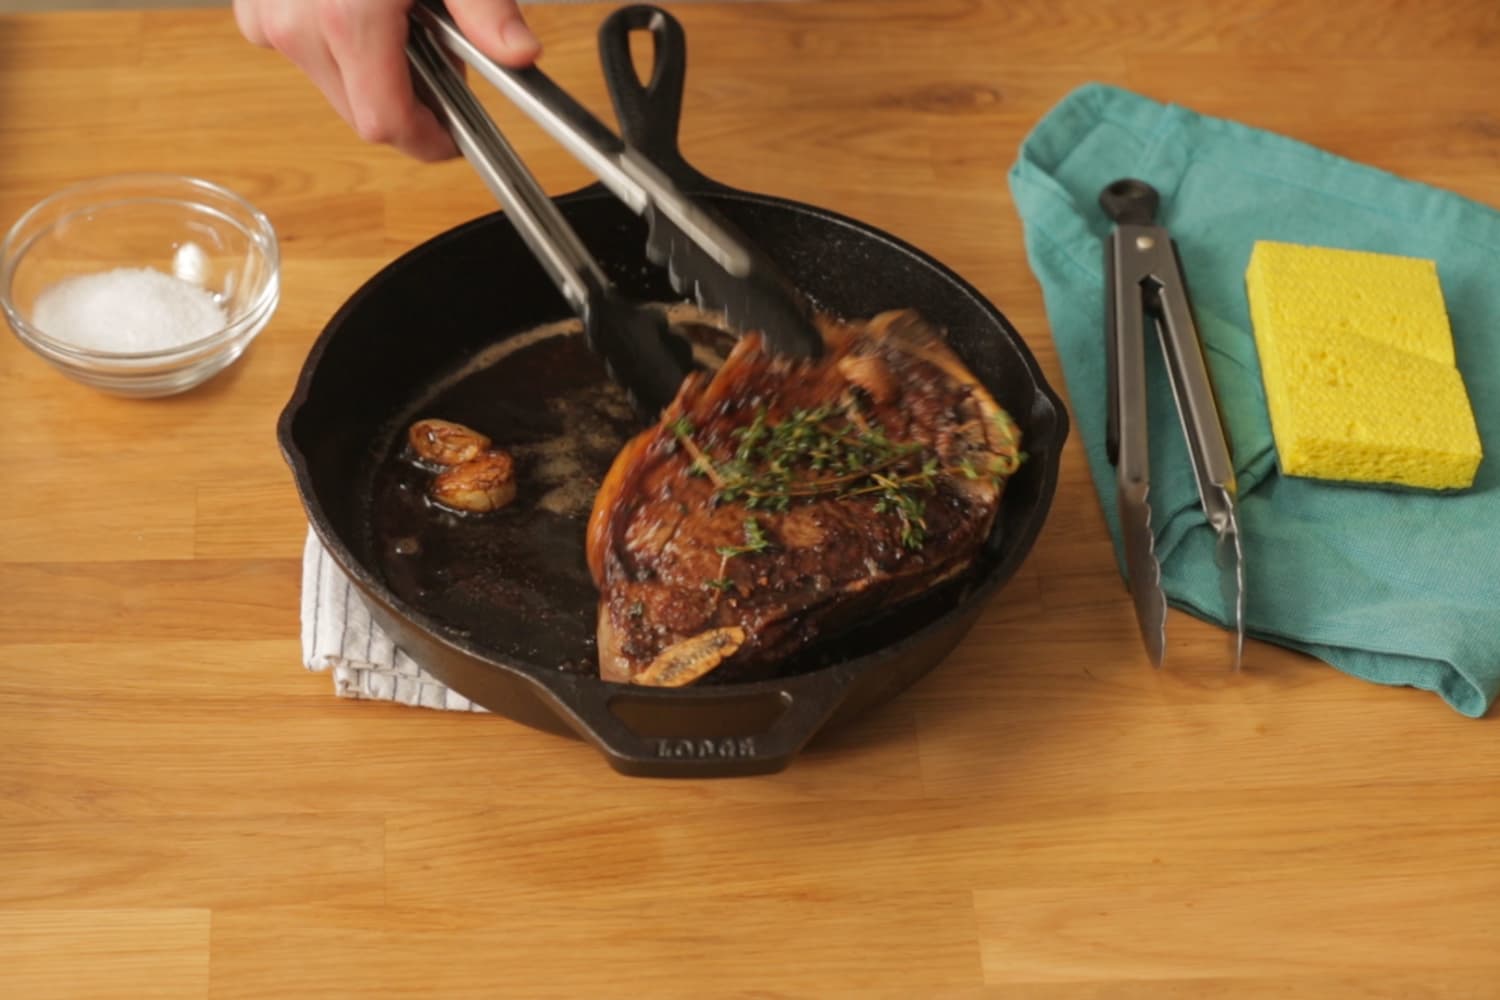 How to Clean a Cast-Iron Skillet, Cooking School